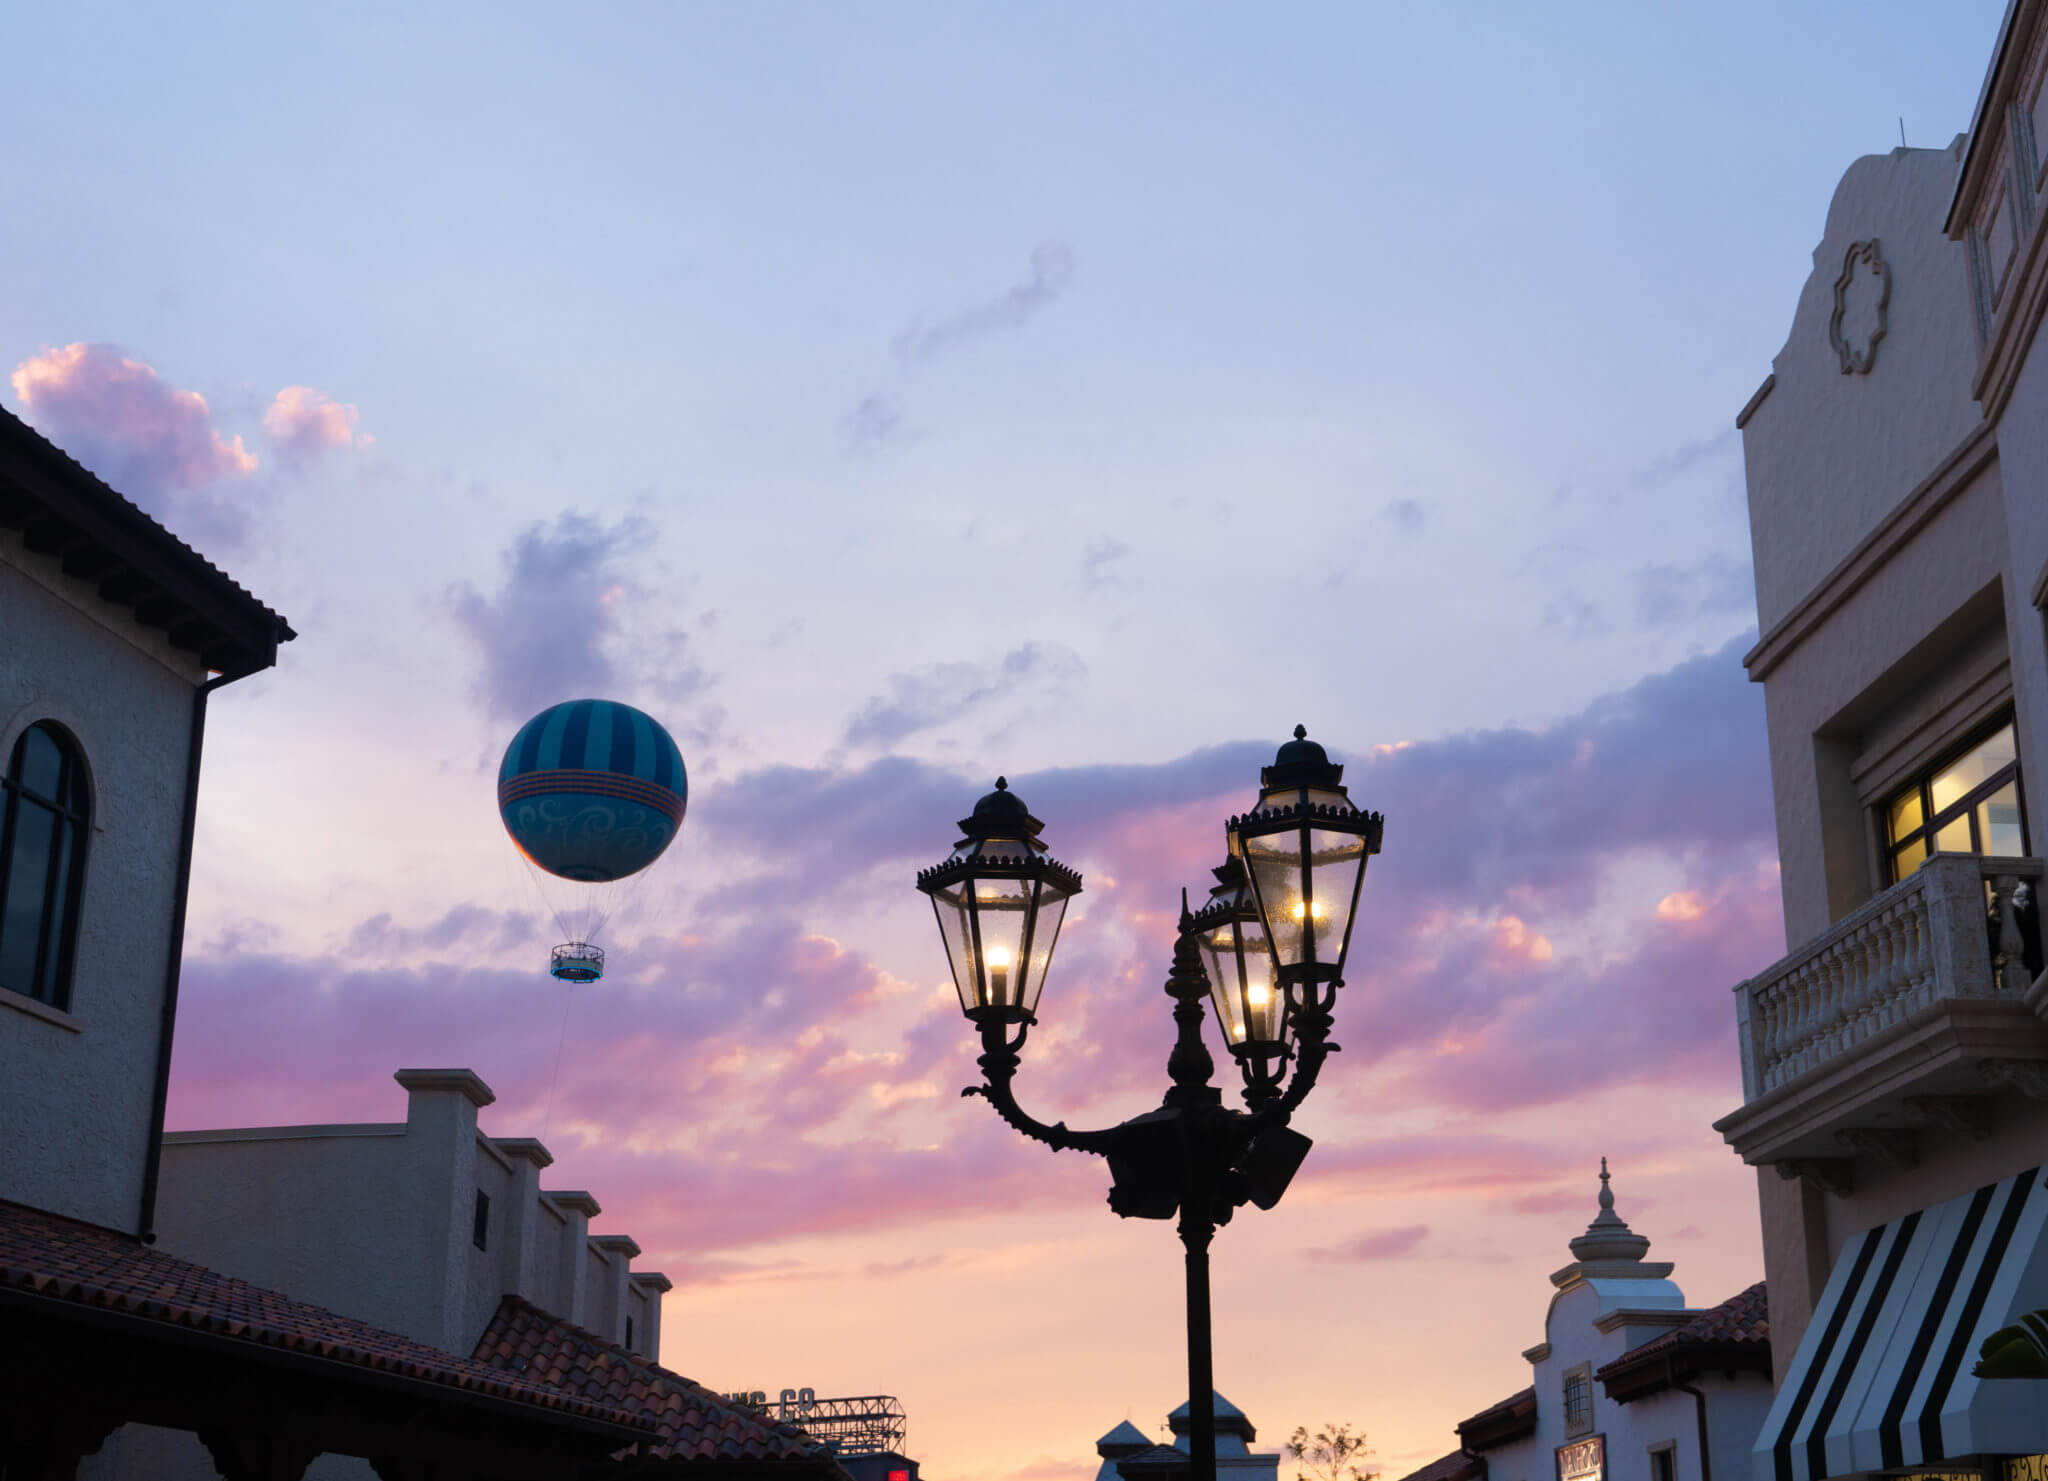 10 Ideas for Your Romantic Getaway to Disney World!